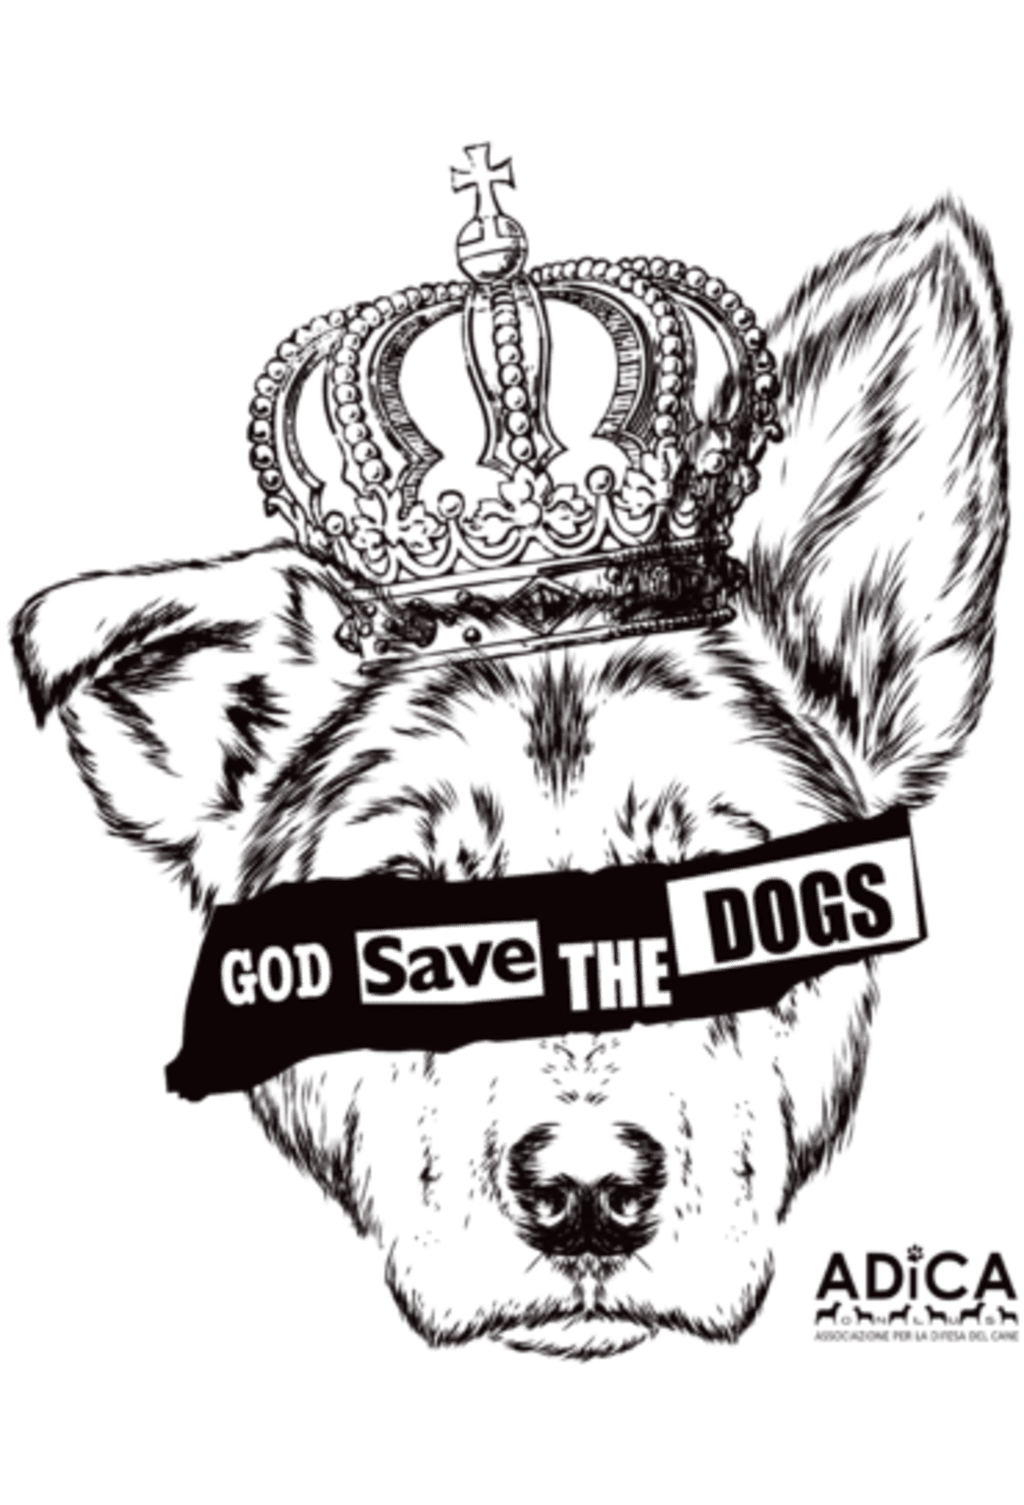 GOD SAVE THE DOGS